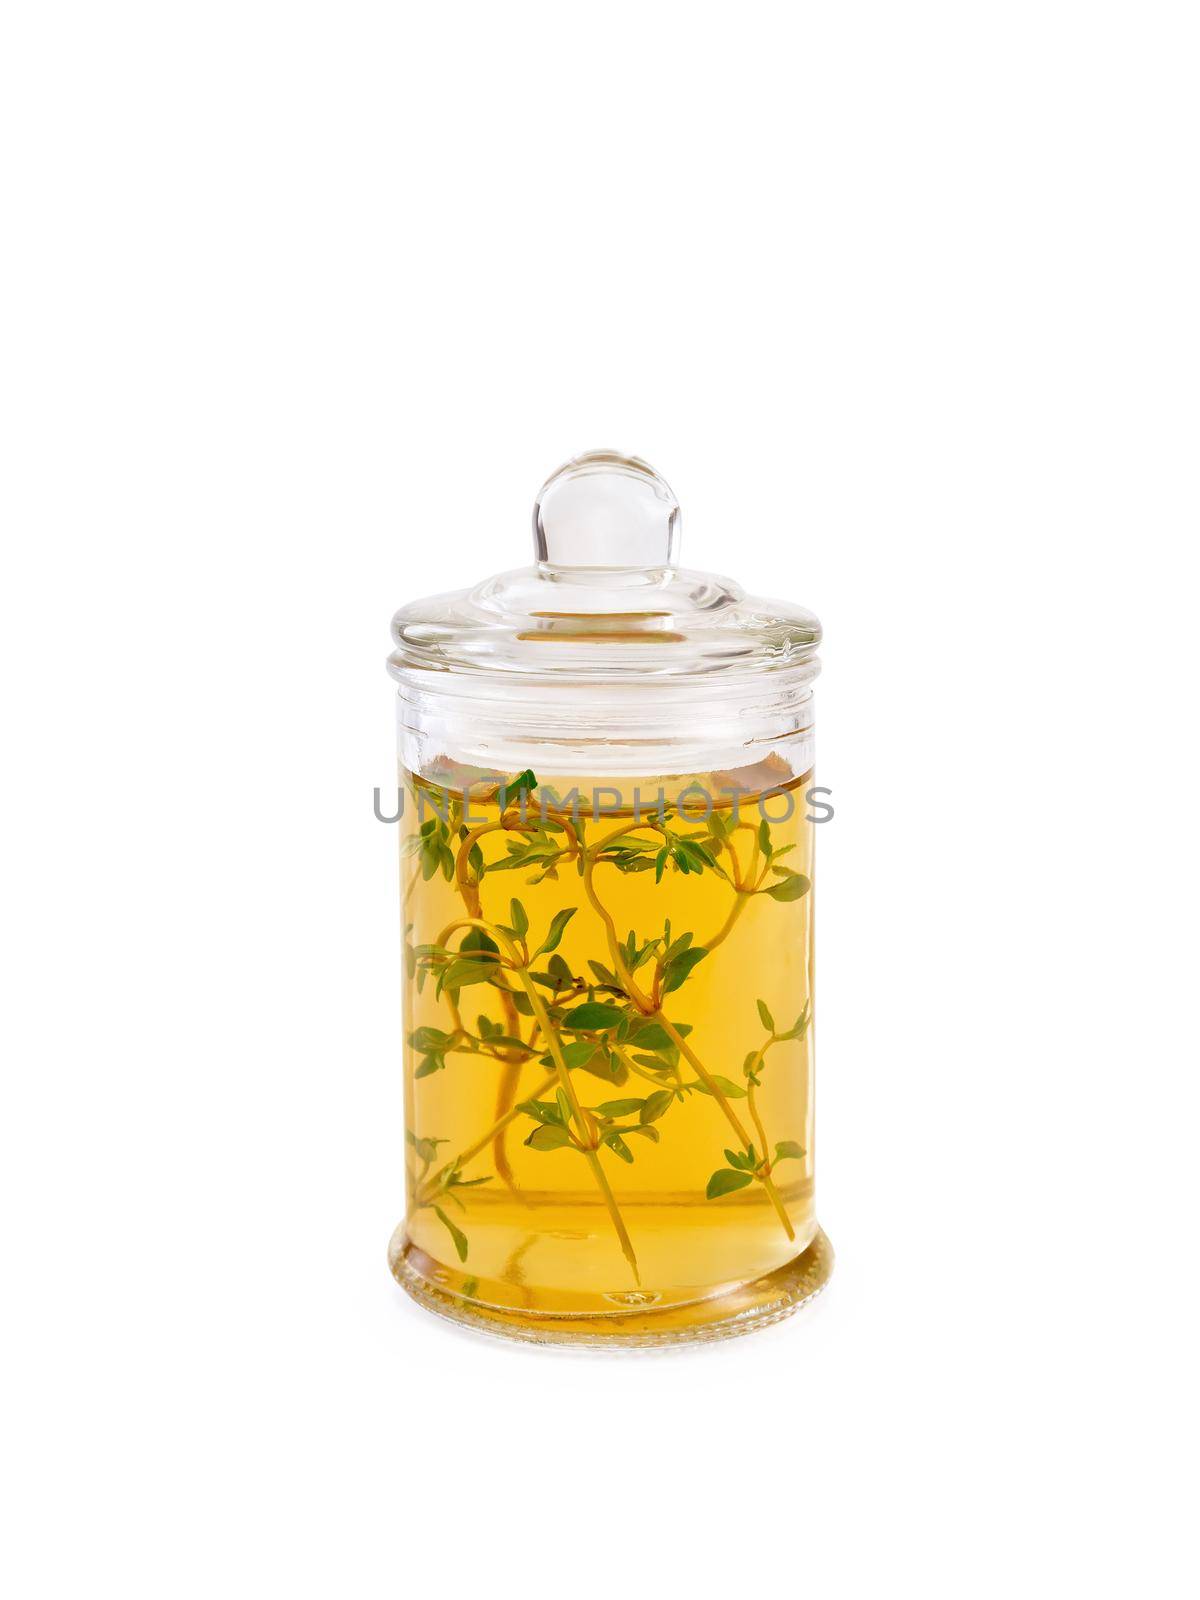 Oil or vinegar with thyme in jar by rezkrr